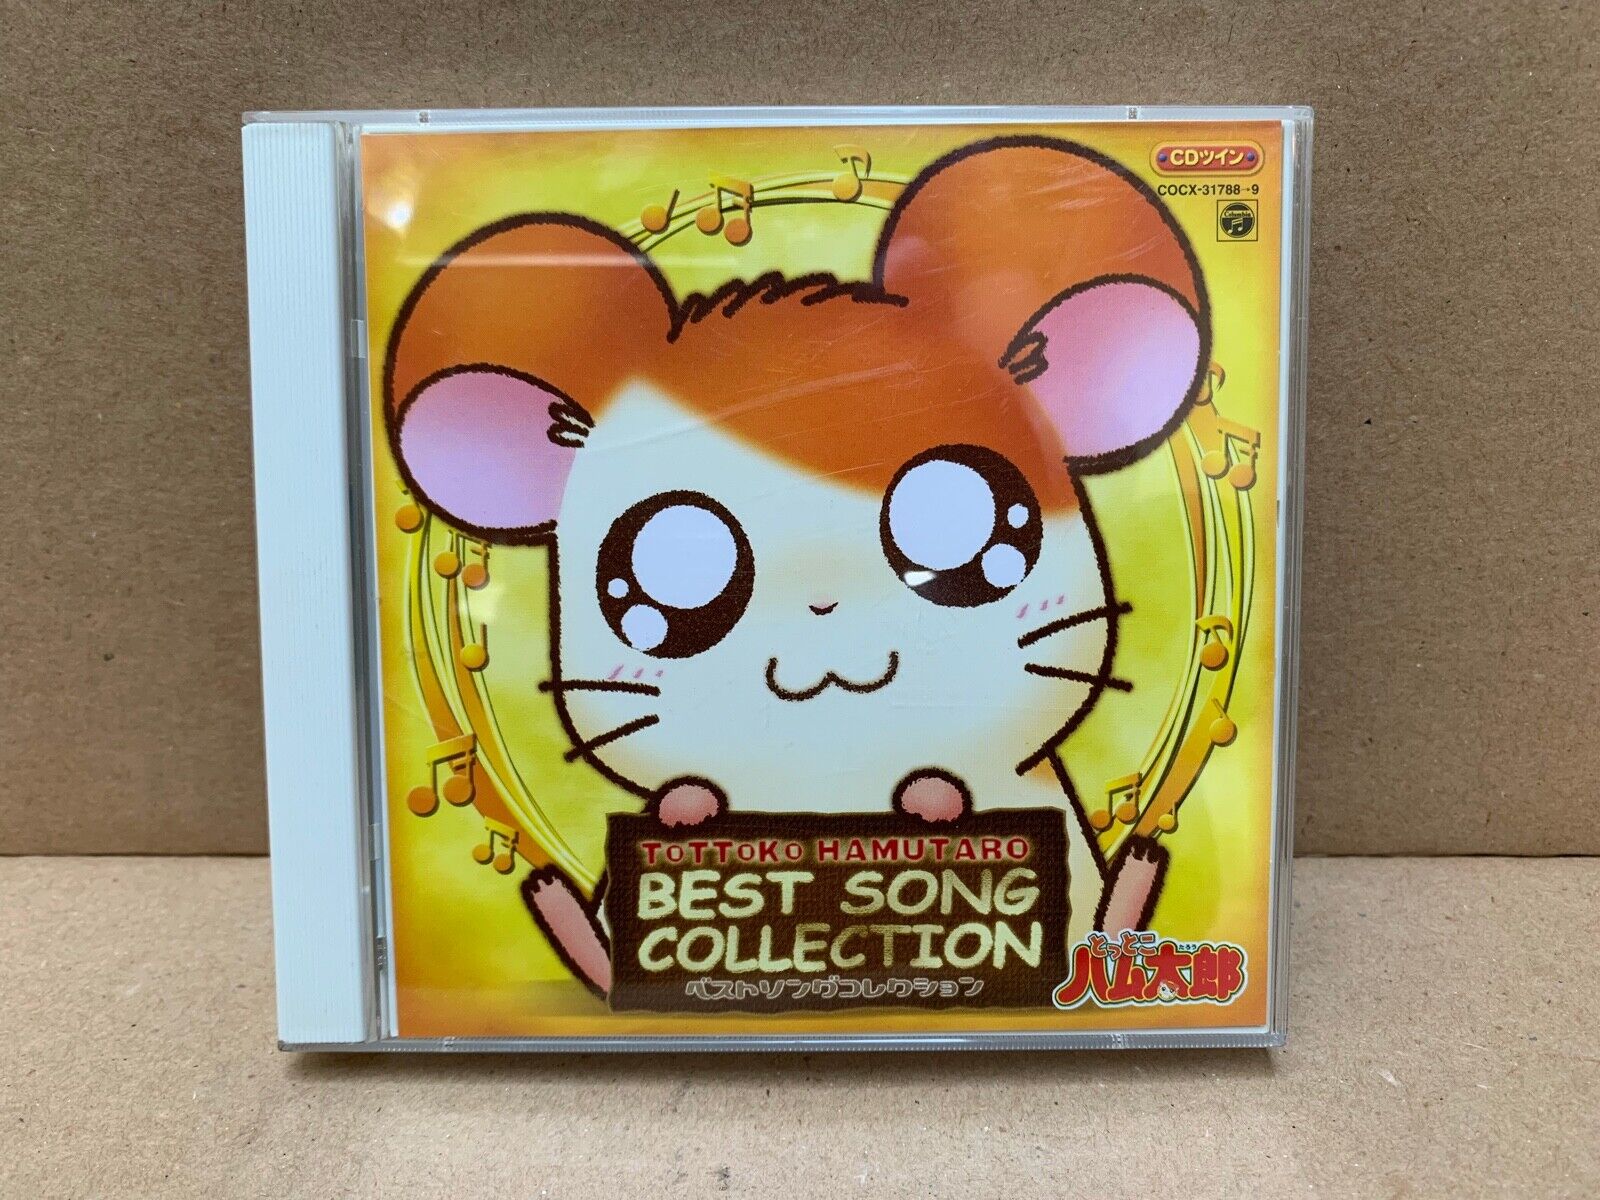 Tottoko Hamtaro Best Song Collection Japanese Soundtrack 2-Disc CD COCX-31788-9